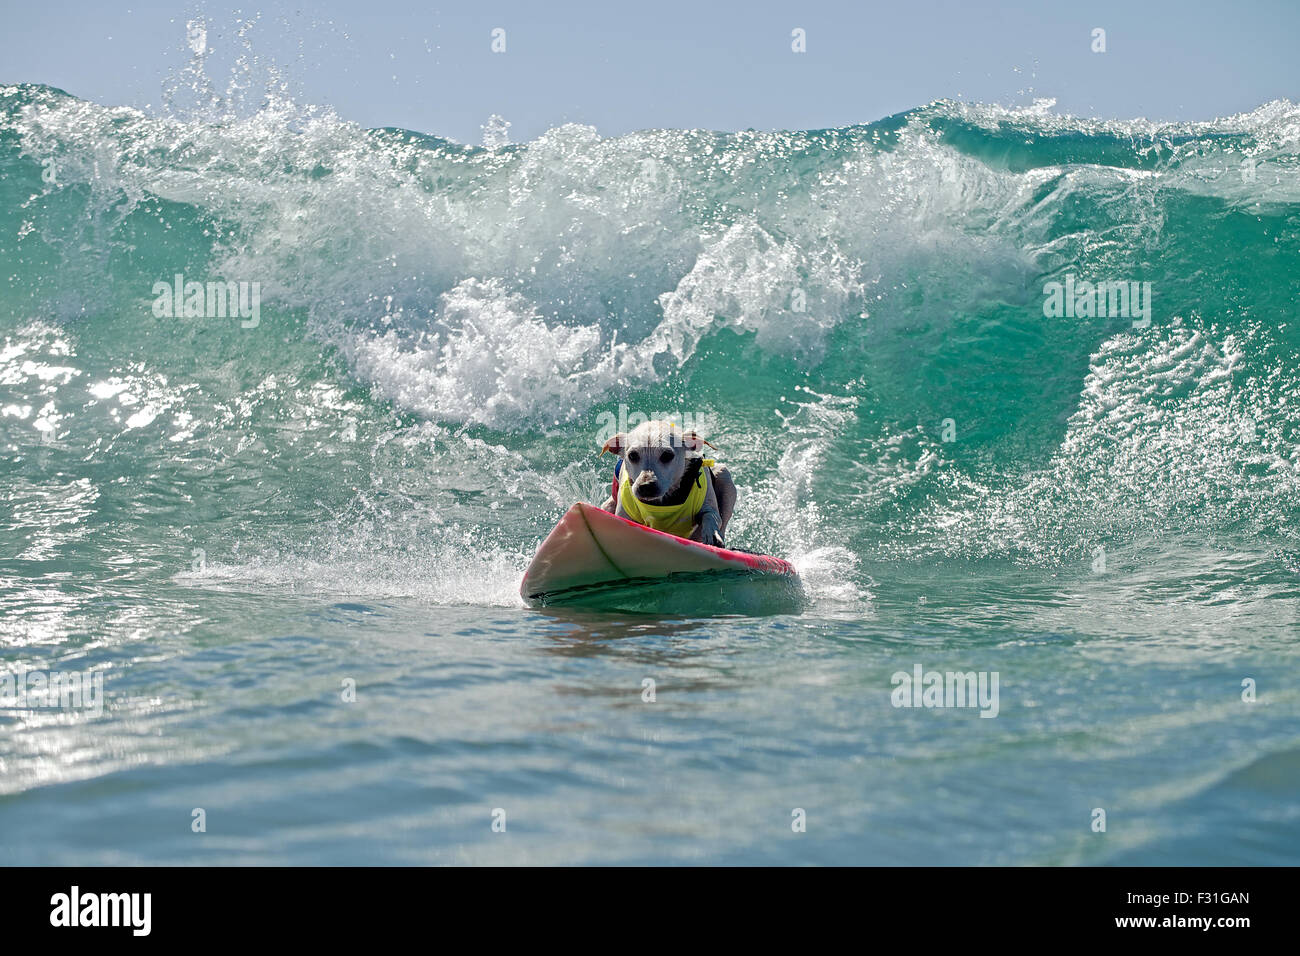 Huntington Beach, California, USA. 27th Sep, 2015. Sugar the surf dog at the Surf City Surf Dog® contest. Dogs from around the world hit the waves to surf during the Surf City Surf Dog ® surf contest held at Dog Beach in Huntington Beach, CA on Sunday September 27, 2015. Credit:  Benjamin Ginsberg/Alamy Live News Stock Photo